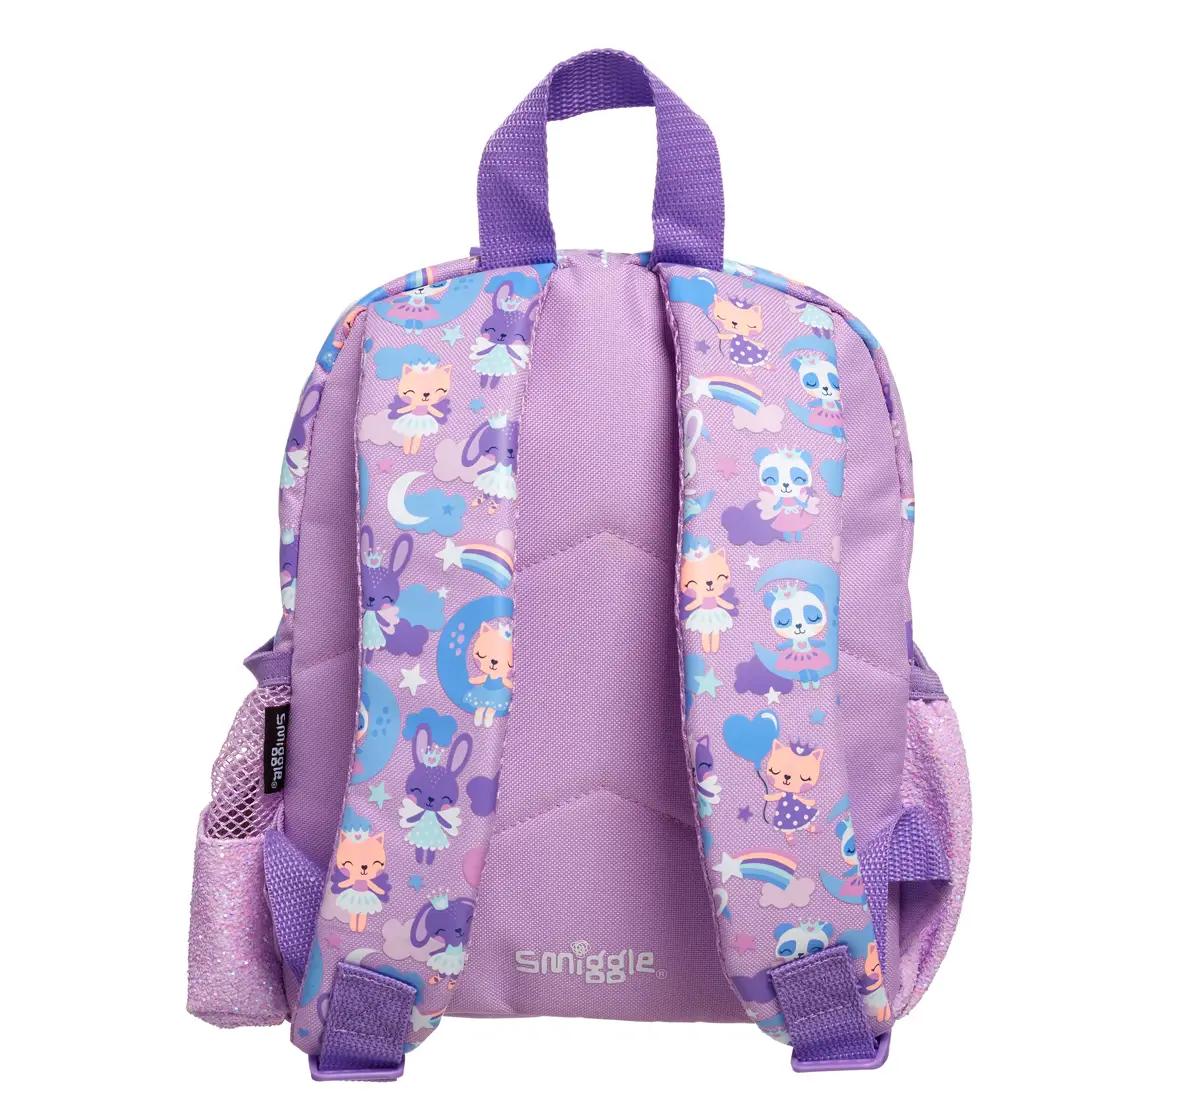 Smiggle Round About Teeny Tiny Backpack, Lilac, 3Y+